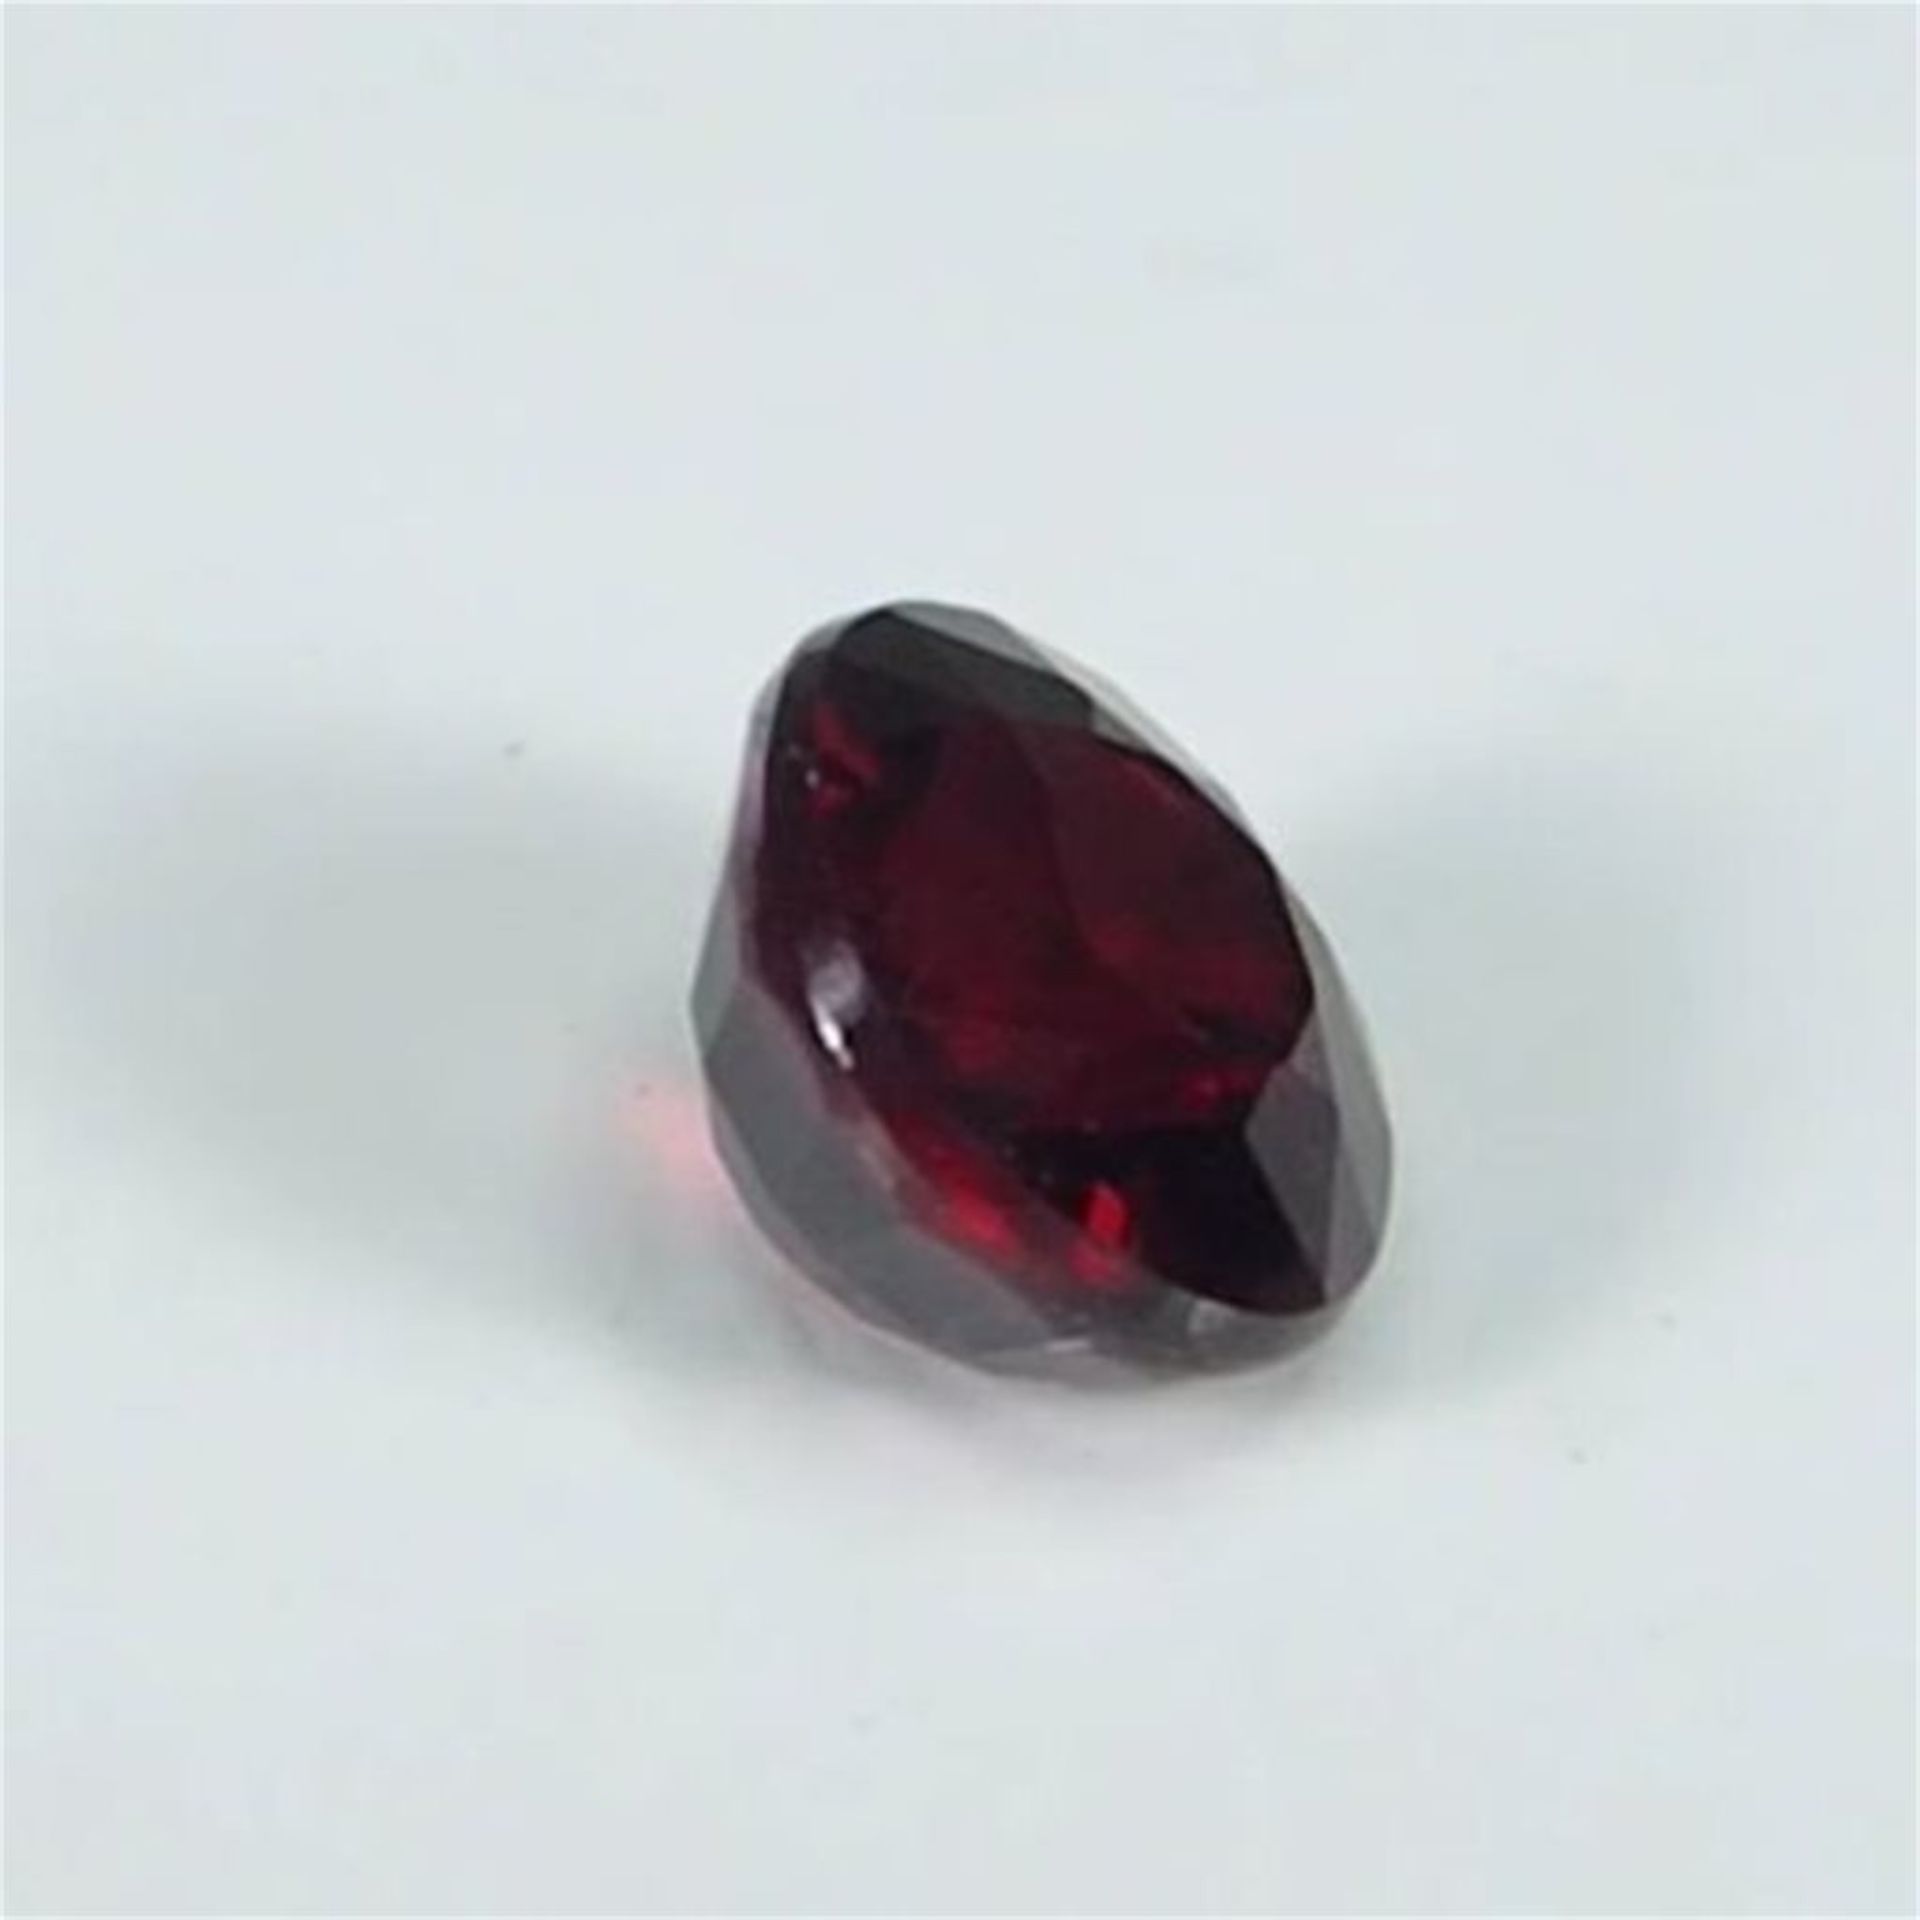 GIA Certified 1.09 ct. Untreated Pigeon’s Blood Ruby - BURMA - Image 6 of 10